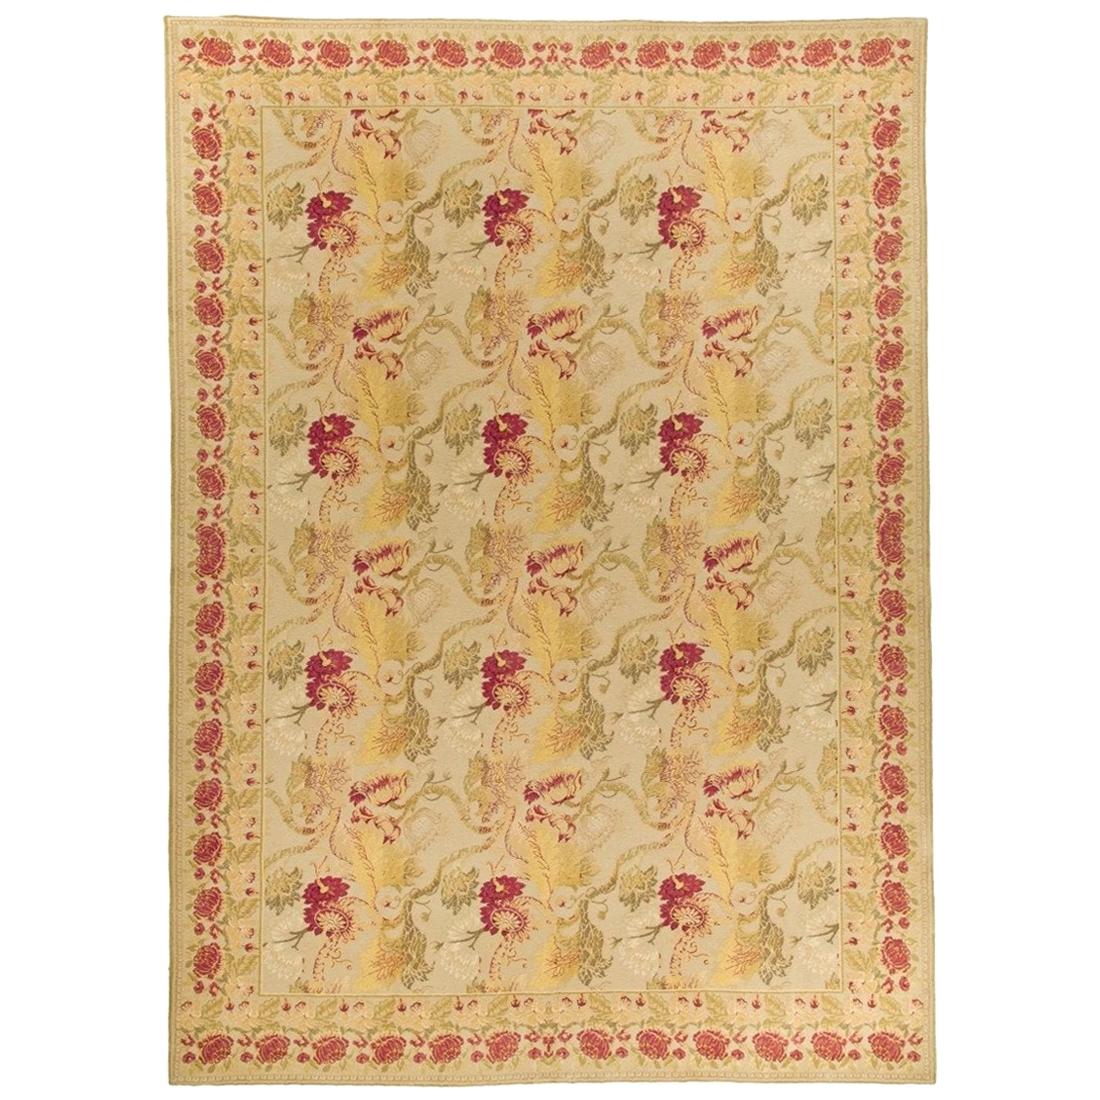 Handwoven Wool Area Rug 8'3 x 10'3 For Sale